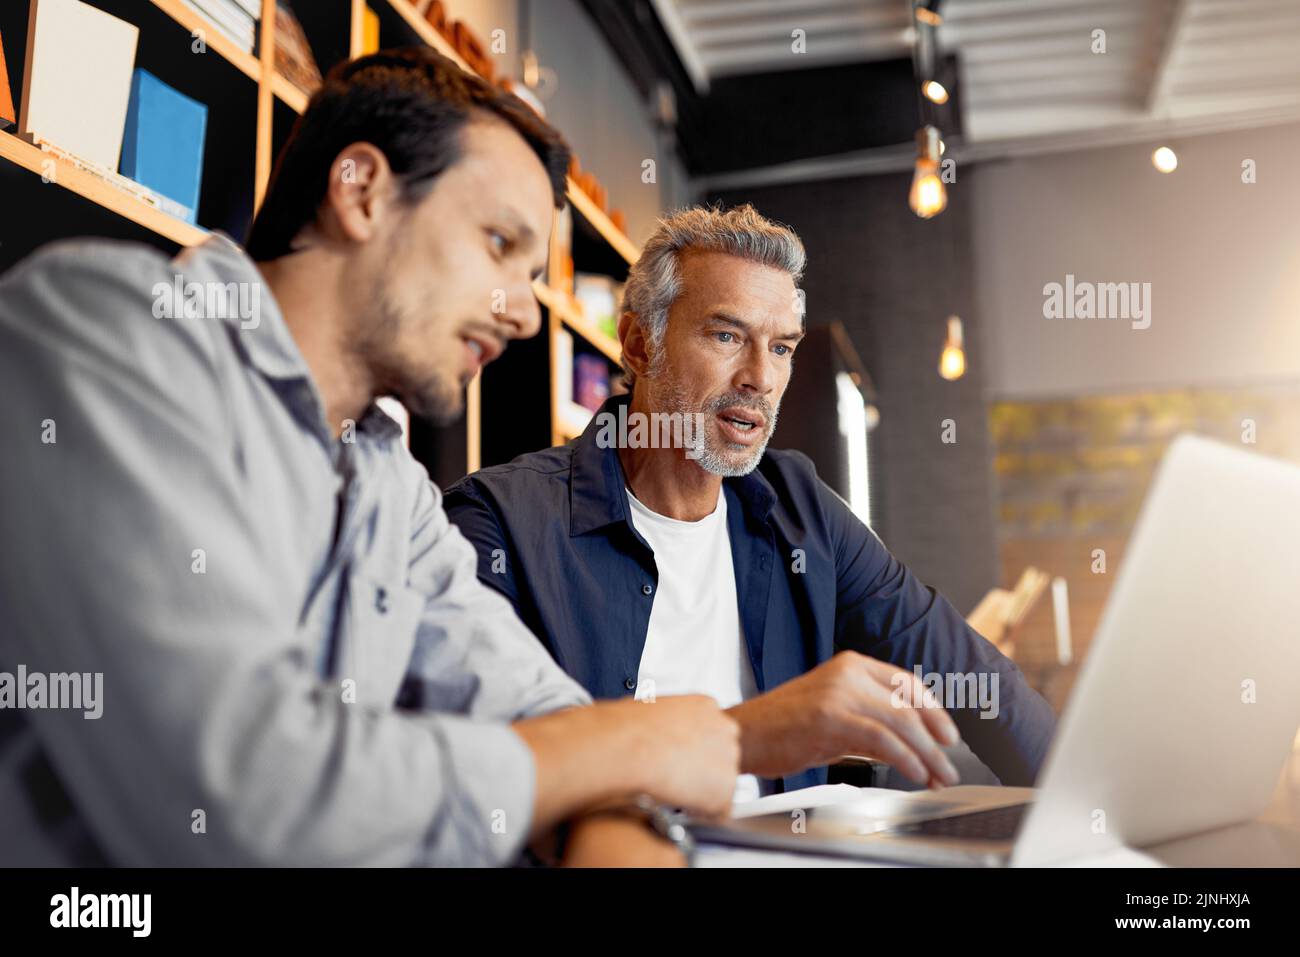 Putting in some extra work over the weekend. two handsome businessmen working together in a local internet cafe. Stock Photo